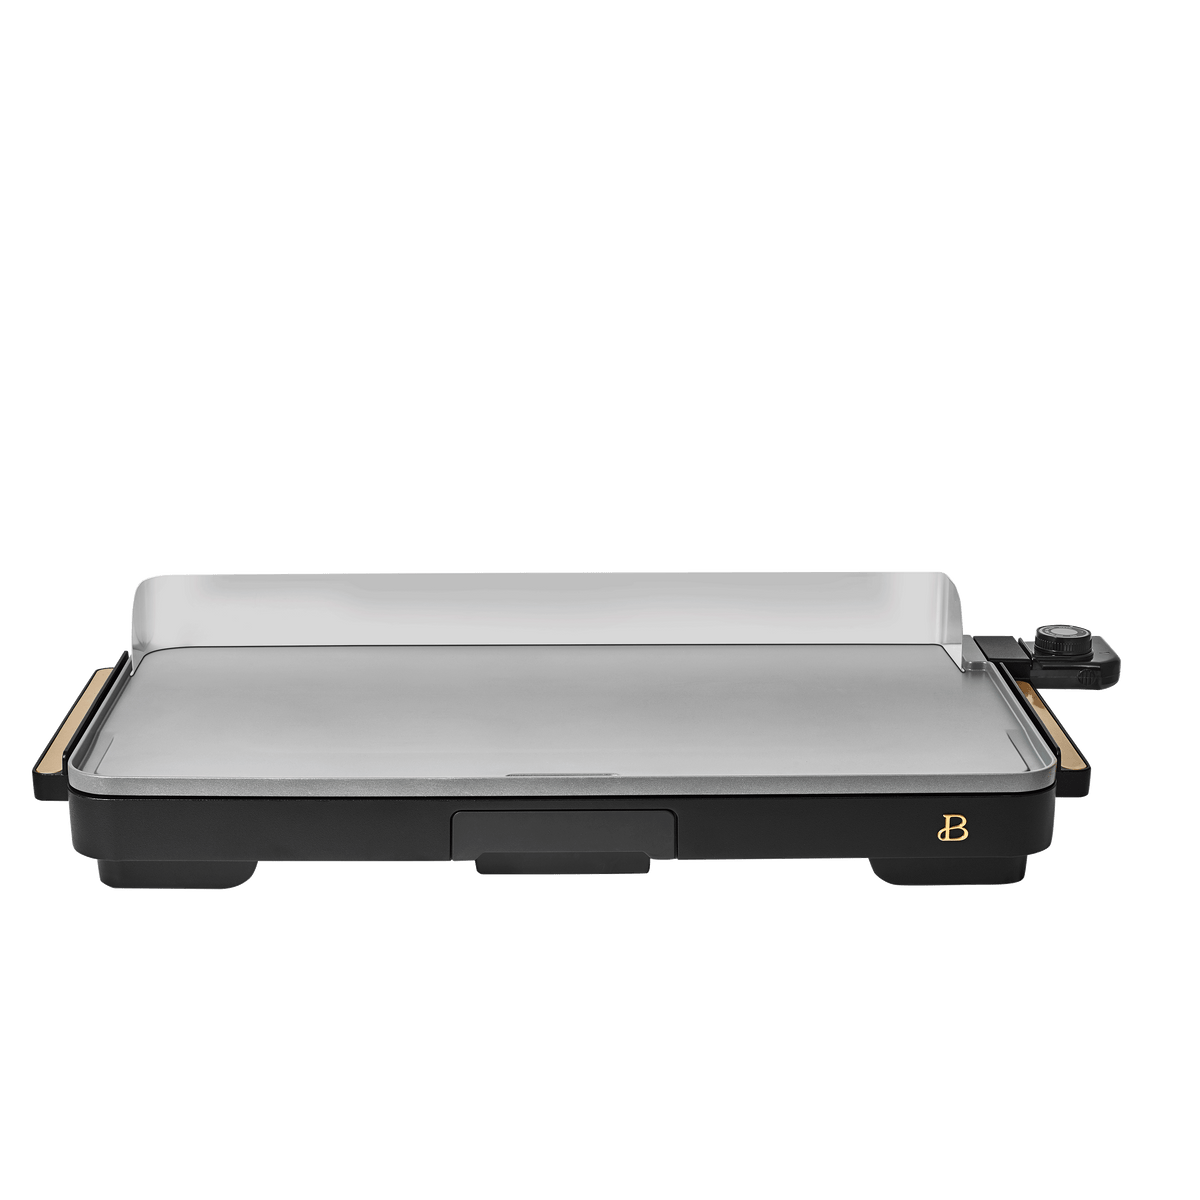 12”x22” Extra Large Electric Griddle – Beautiful™